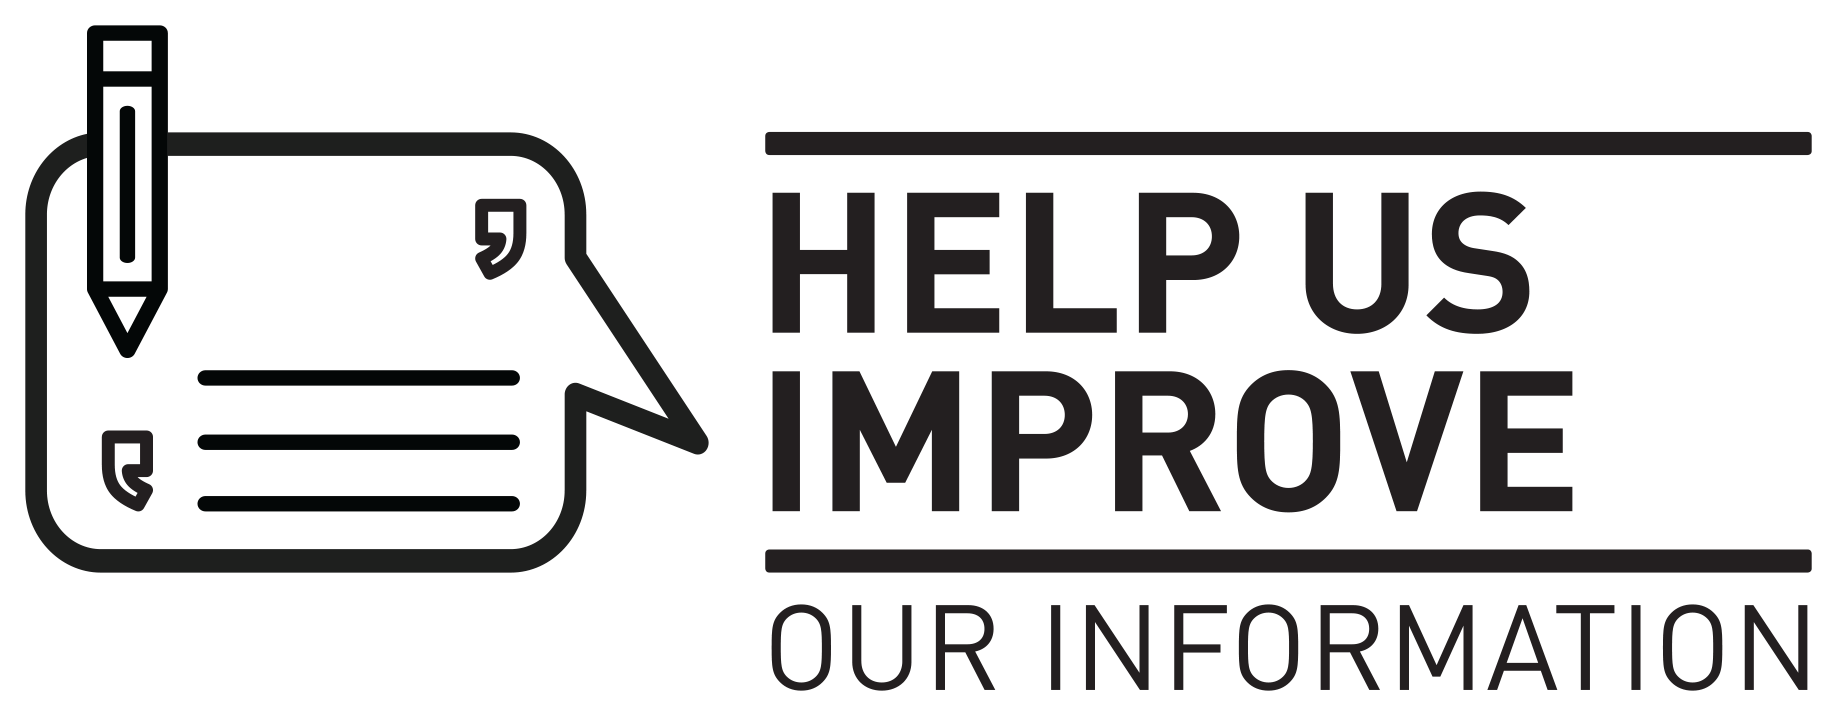 Help us improve our information